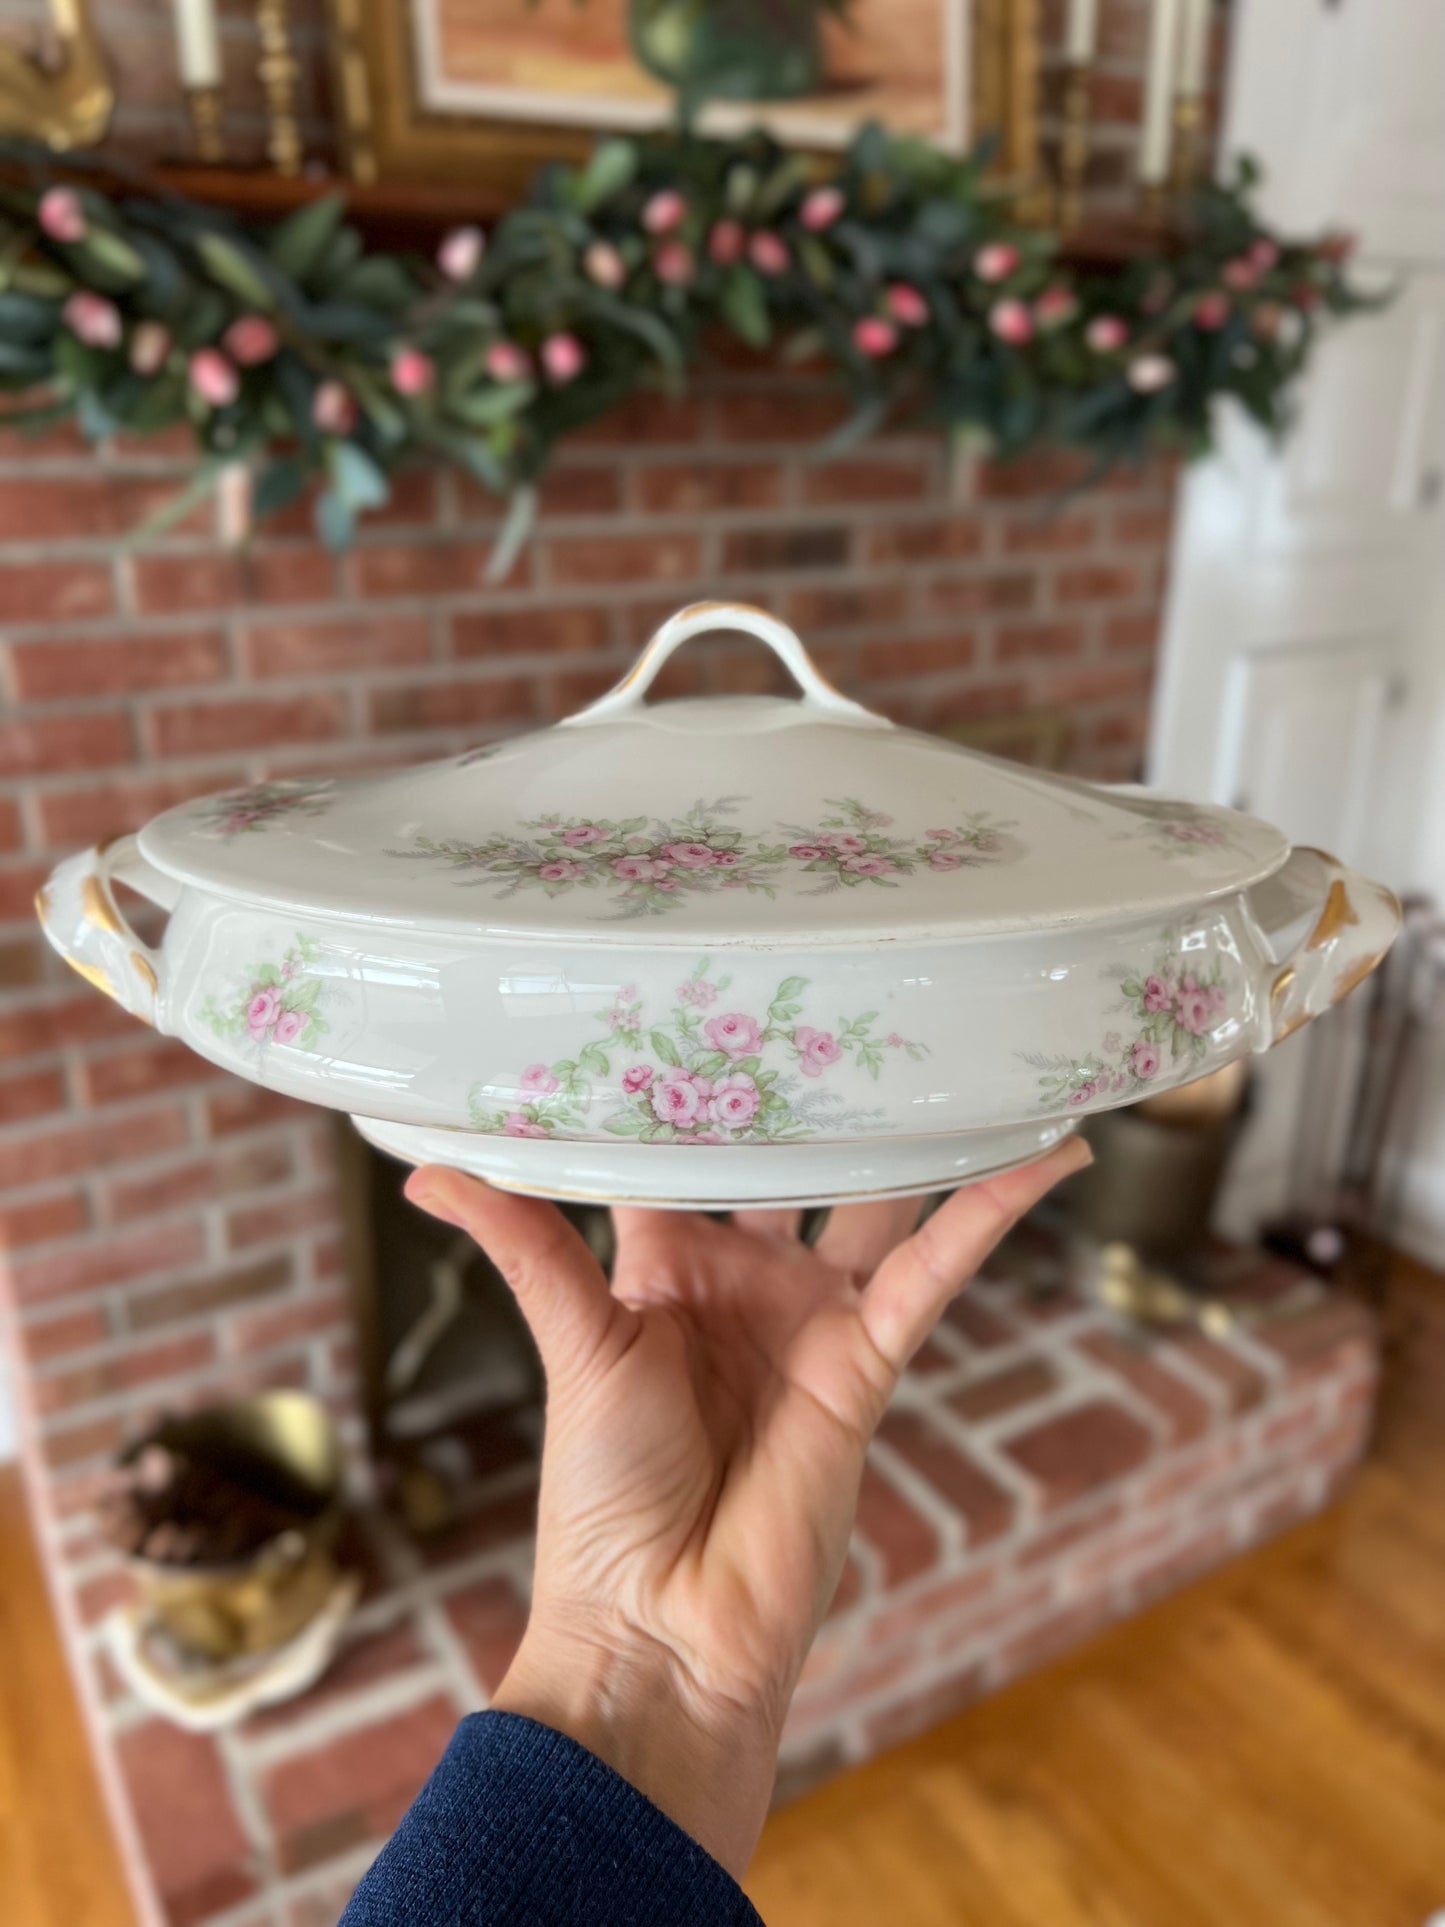 Antique Theodore Haviland Covered Dish, Limoges France